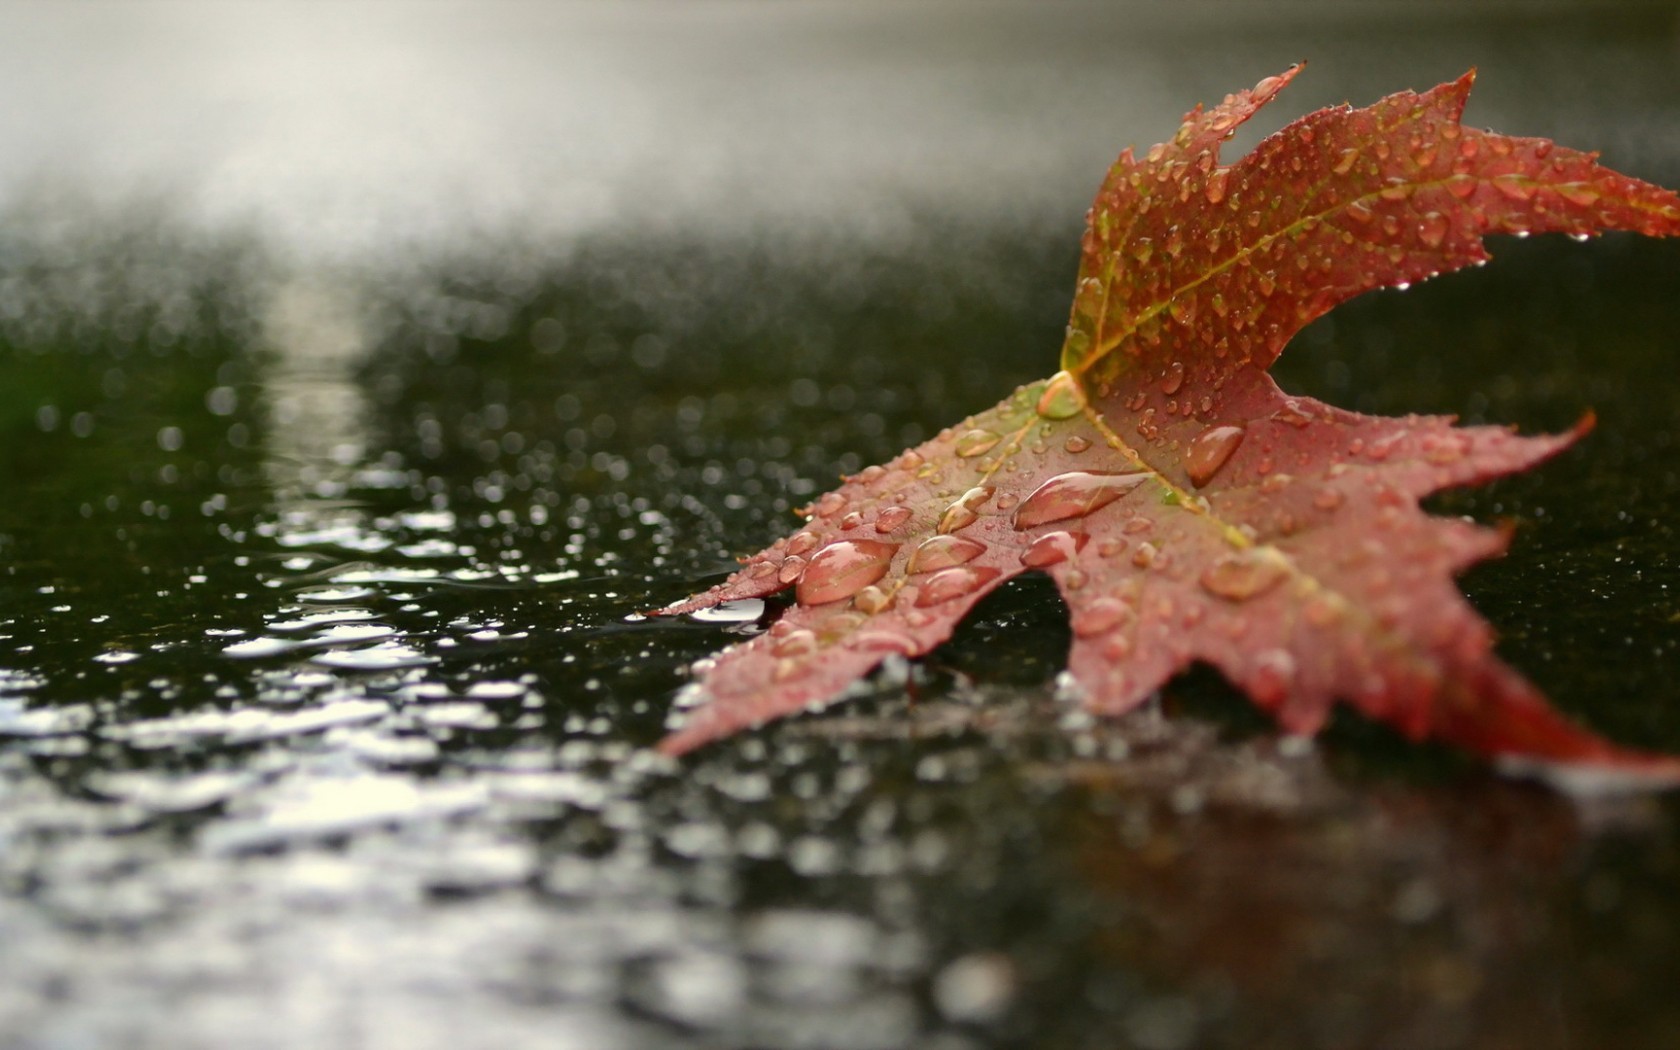 General 1680x1050 bokeh water drops puddle maple leaves leaves fallen leaves outdoors